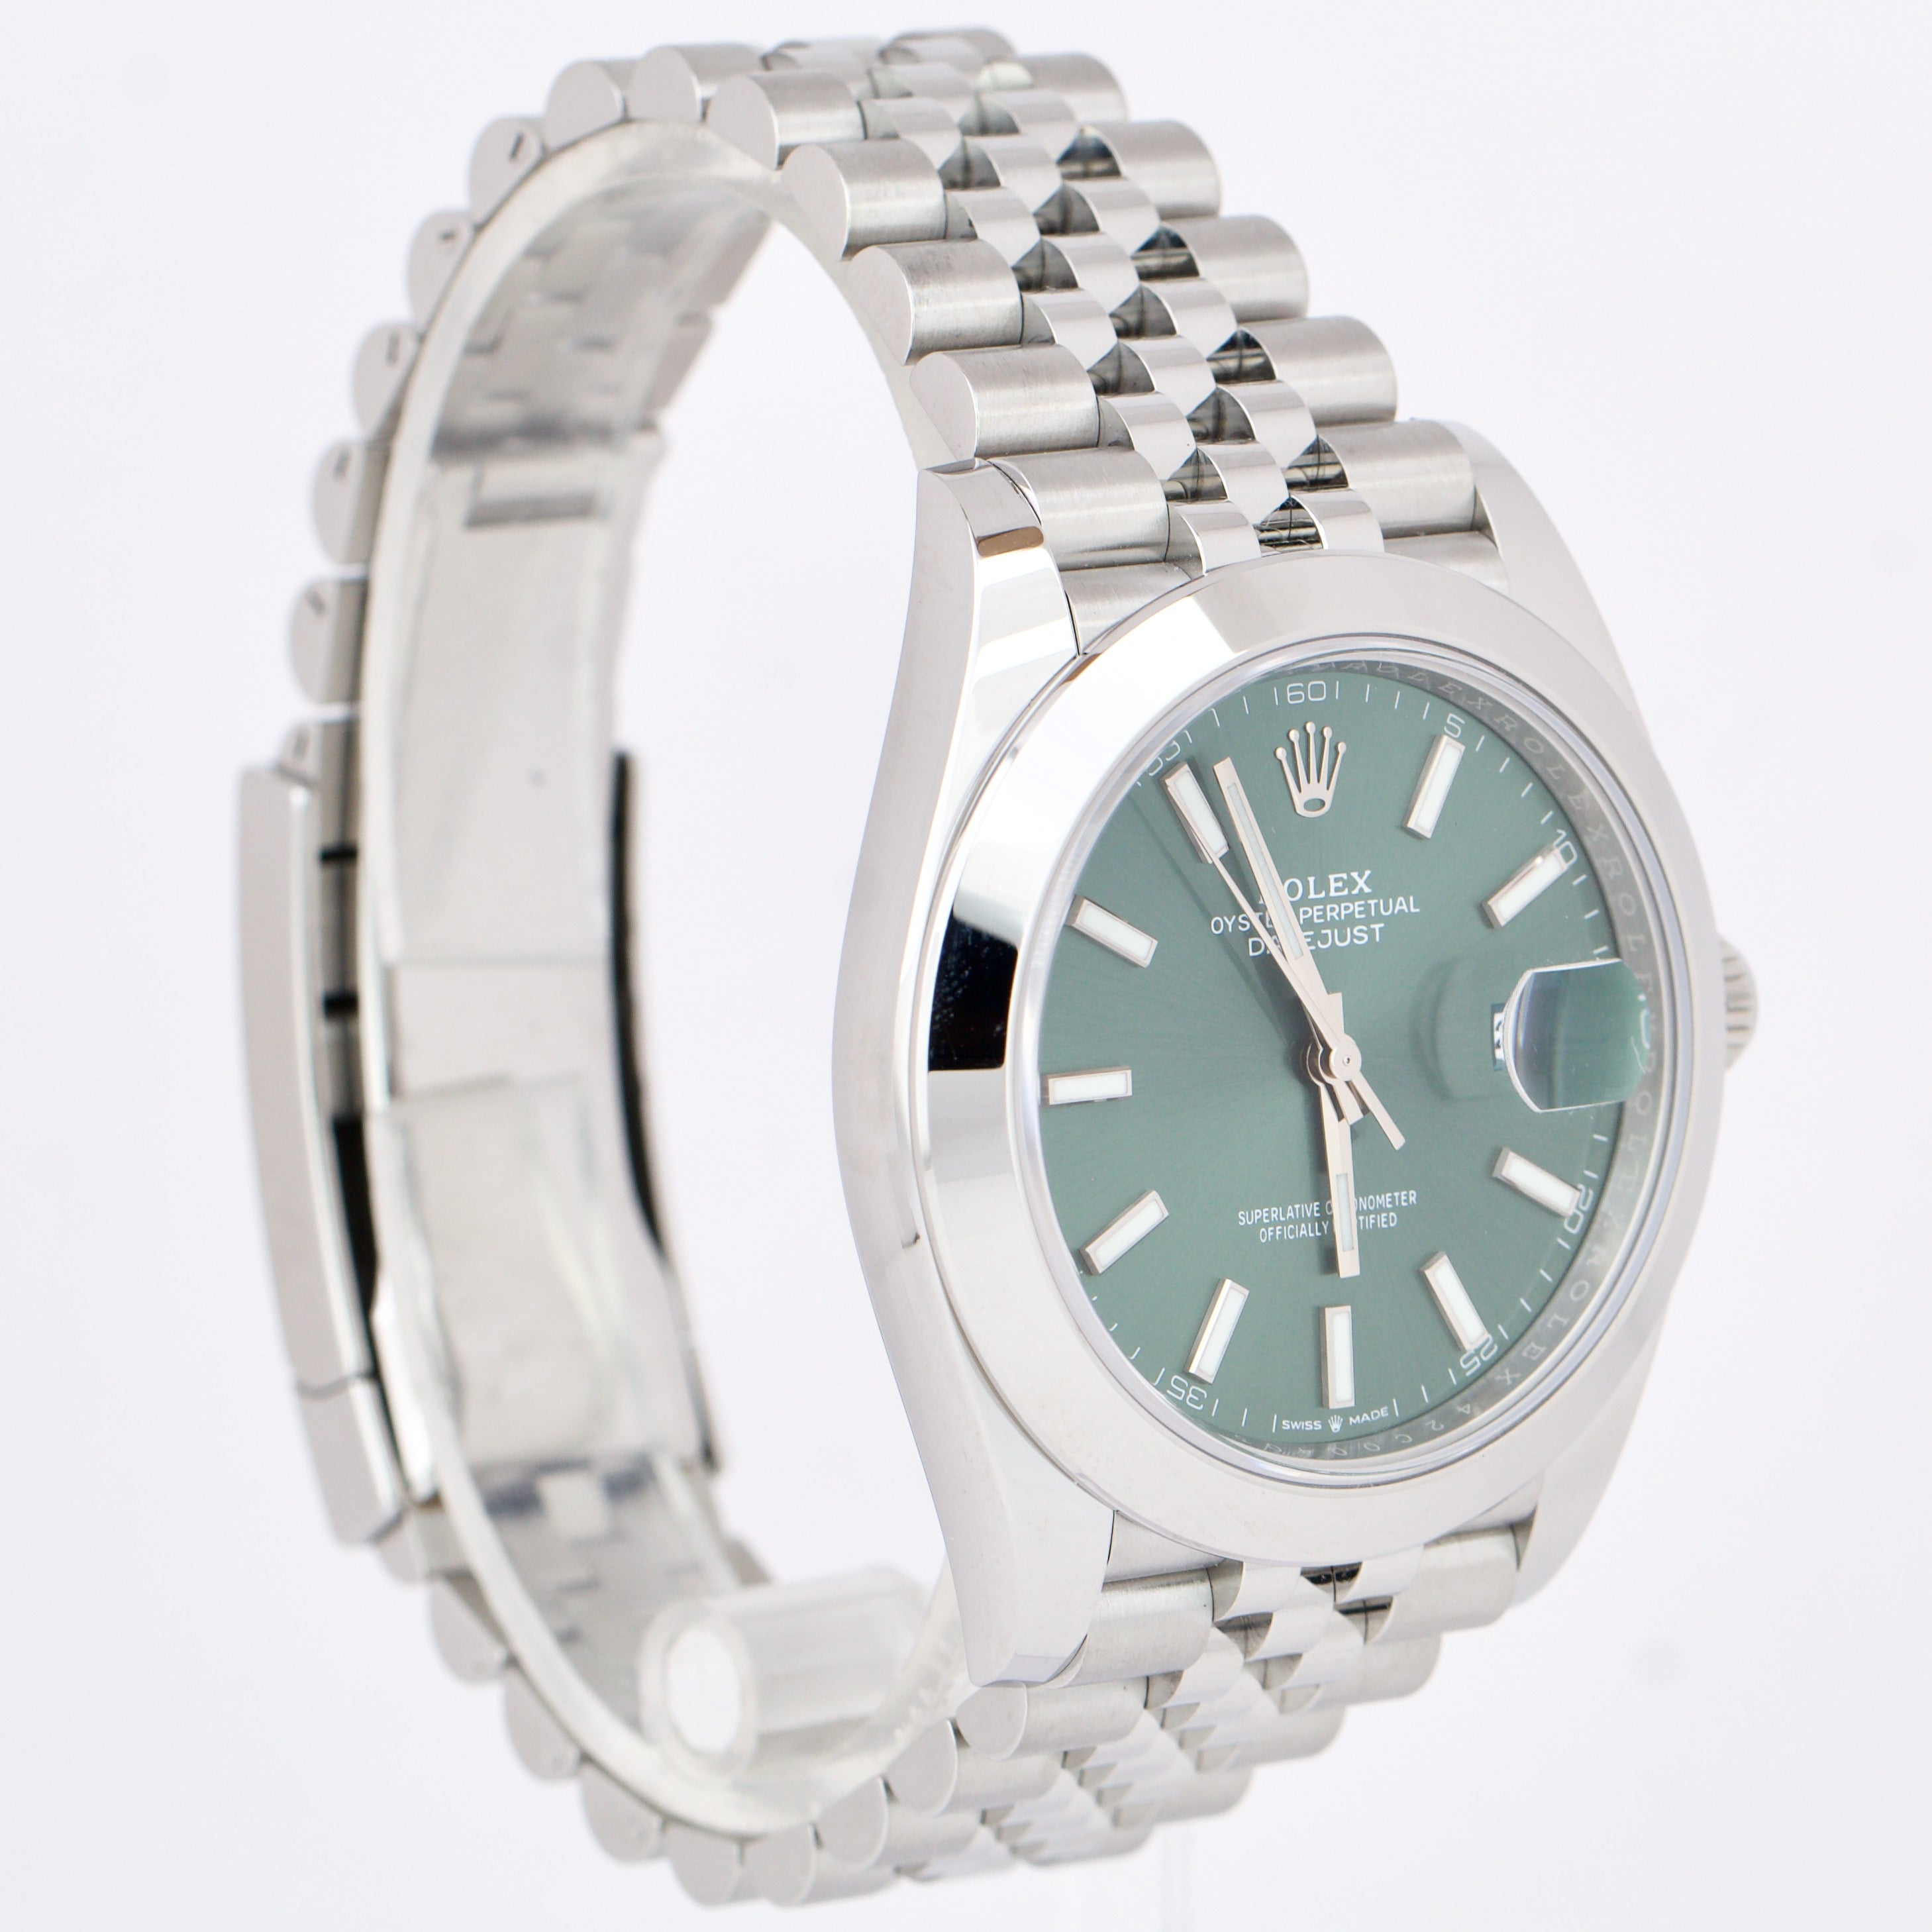 MARCH 2023 NEW Rolex DateJust 41 GREEN 41mm JUBILEE Stainless 126300 Watch B&P